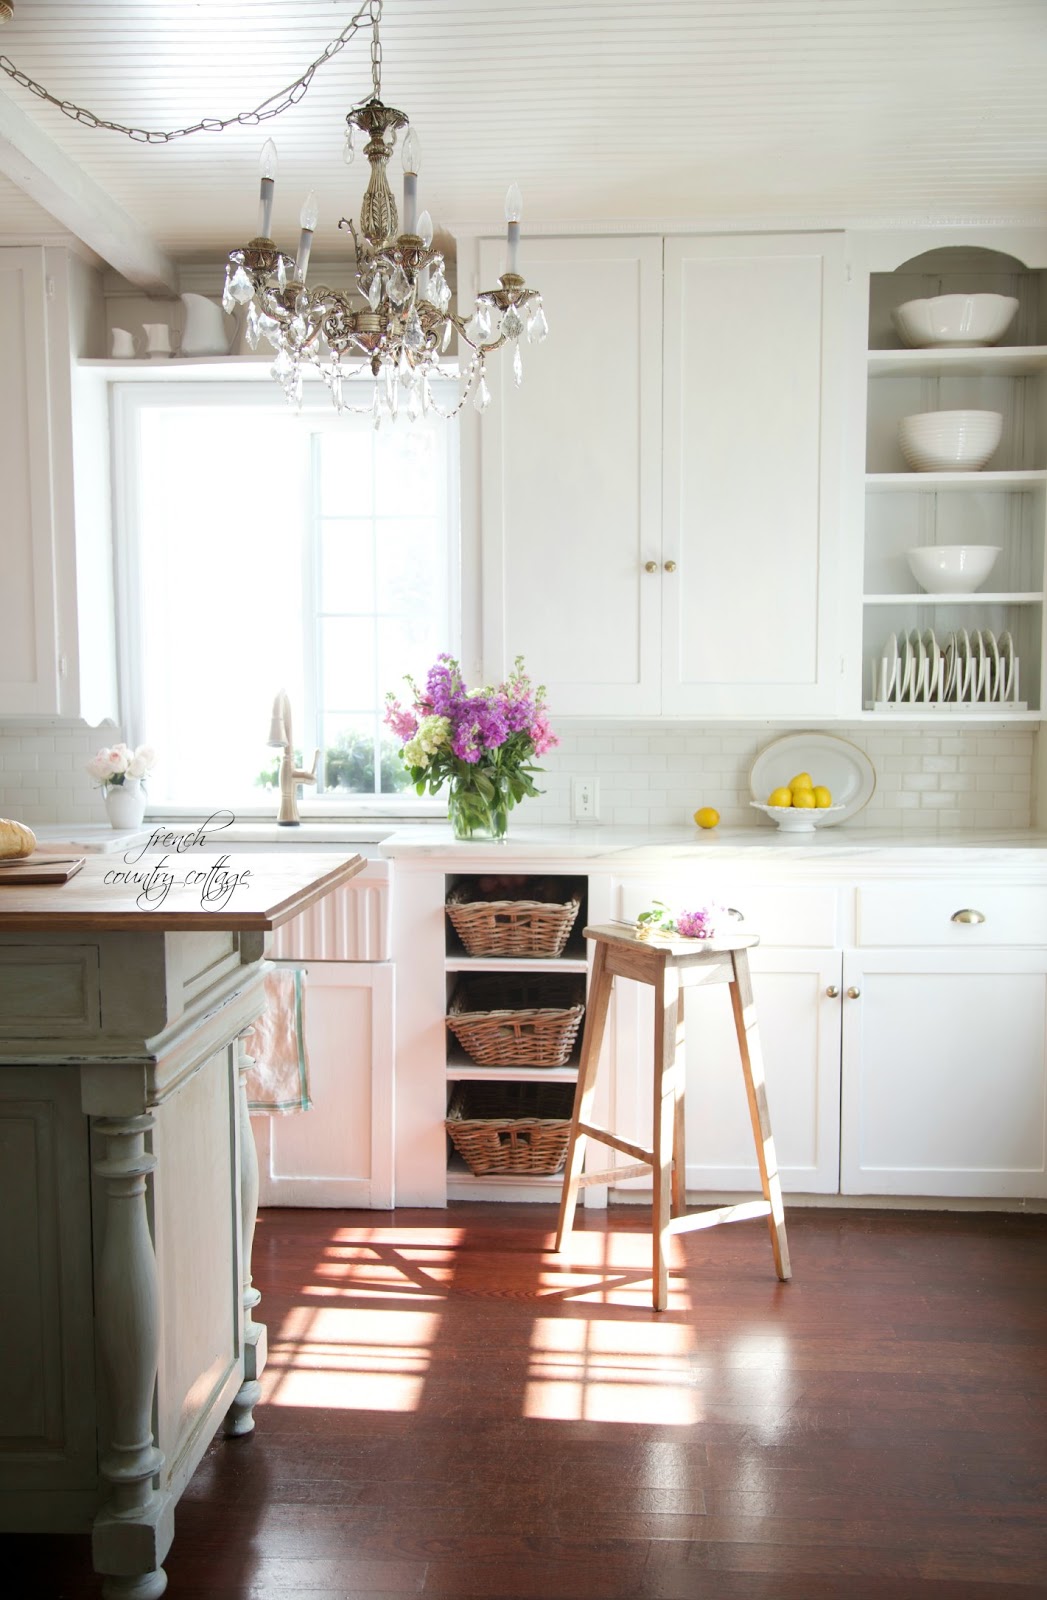 {via French Country Cottage}